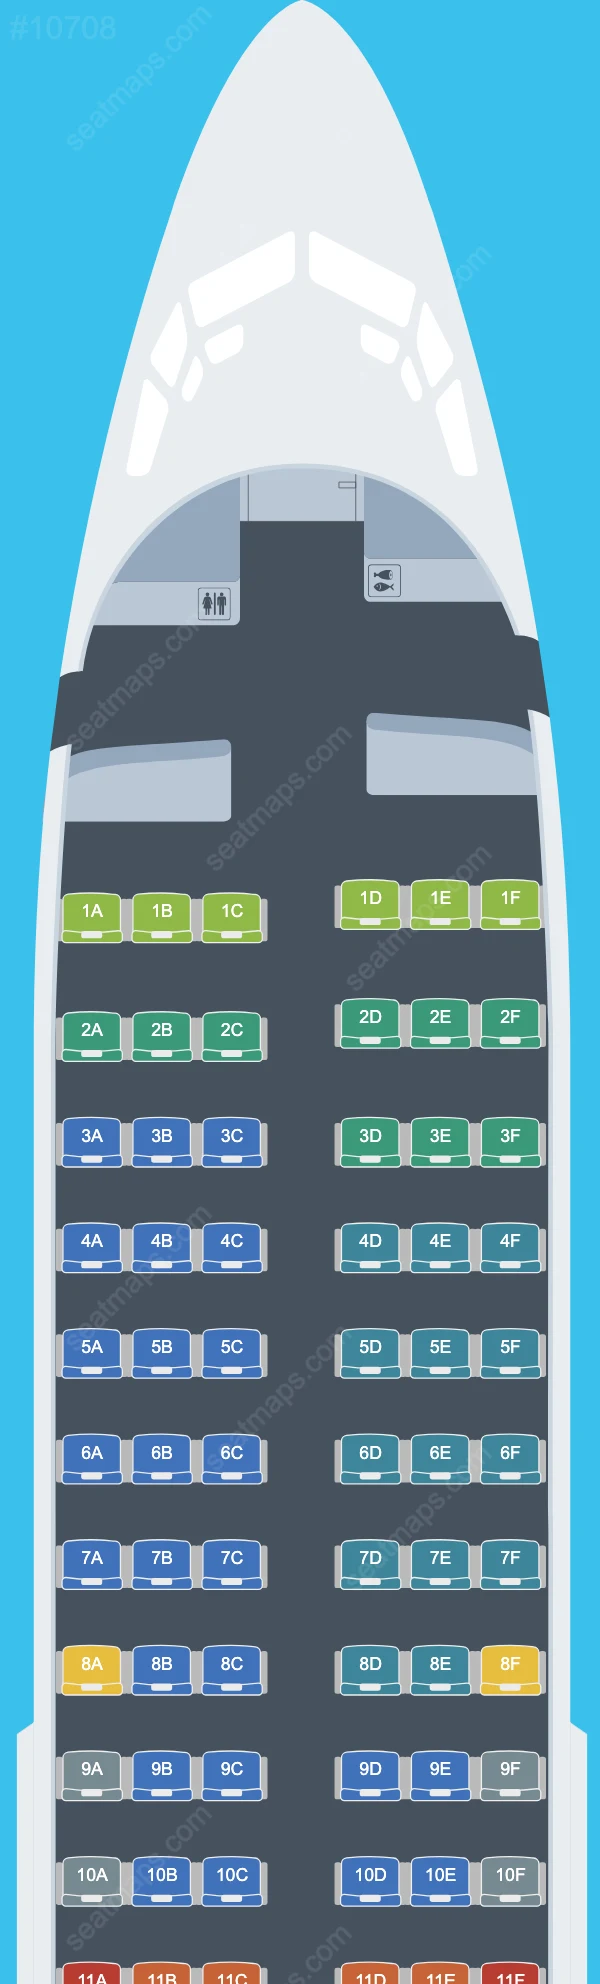 Avelo Airlines Boeing 737 Seat Maps 737-700